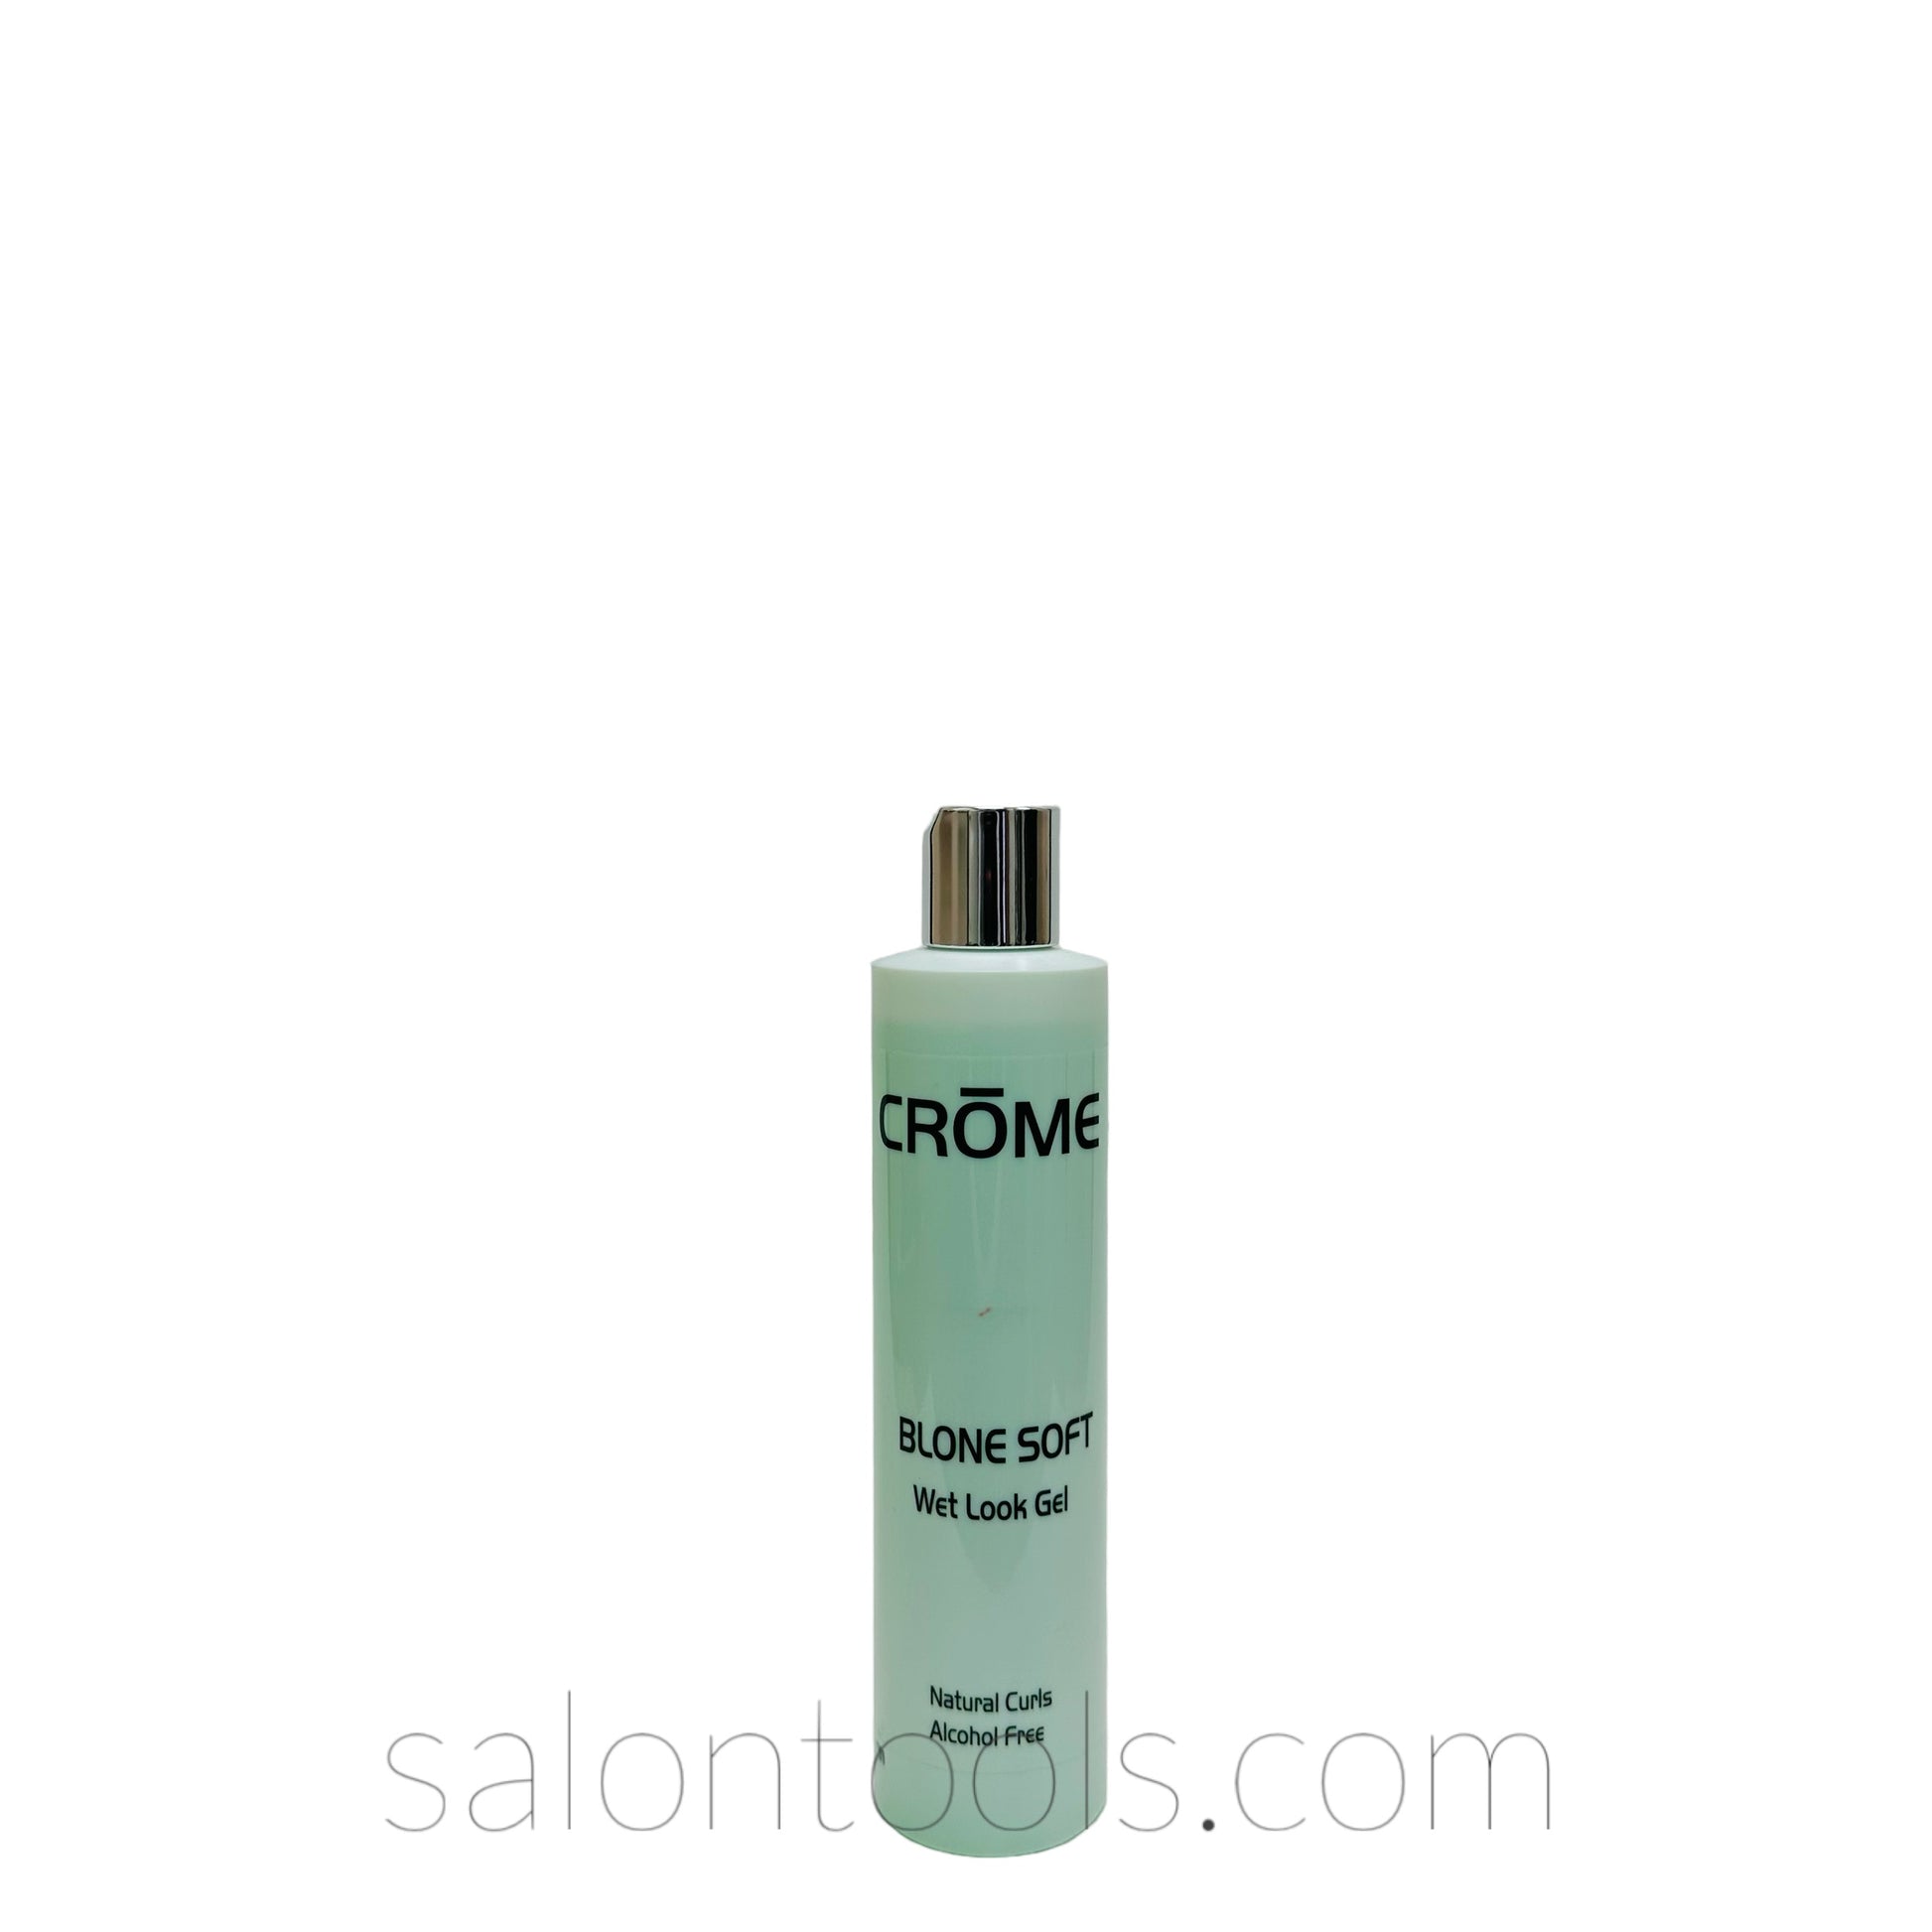 Crome Blone Soft (Wet Look) Gel (Alcohol Free) 10oz